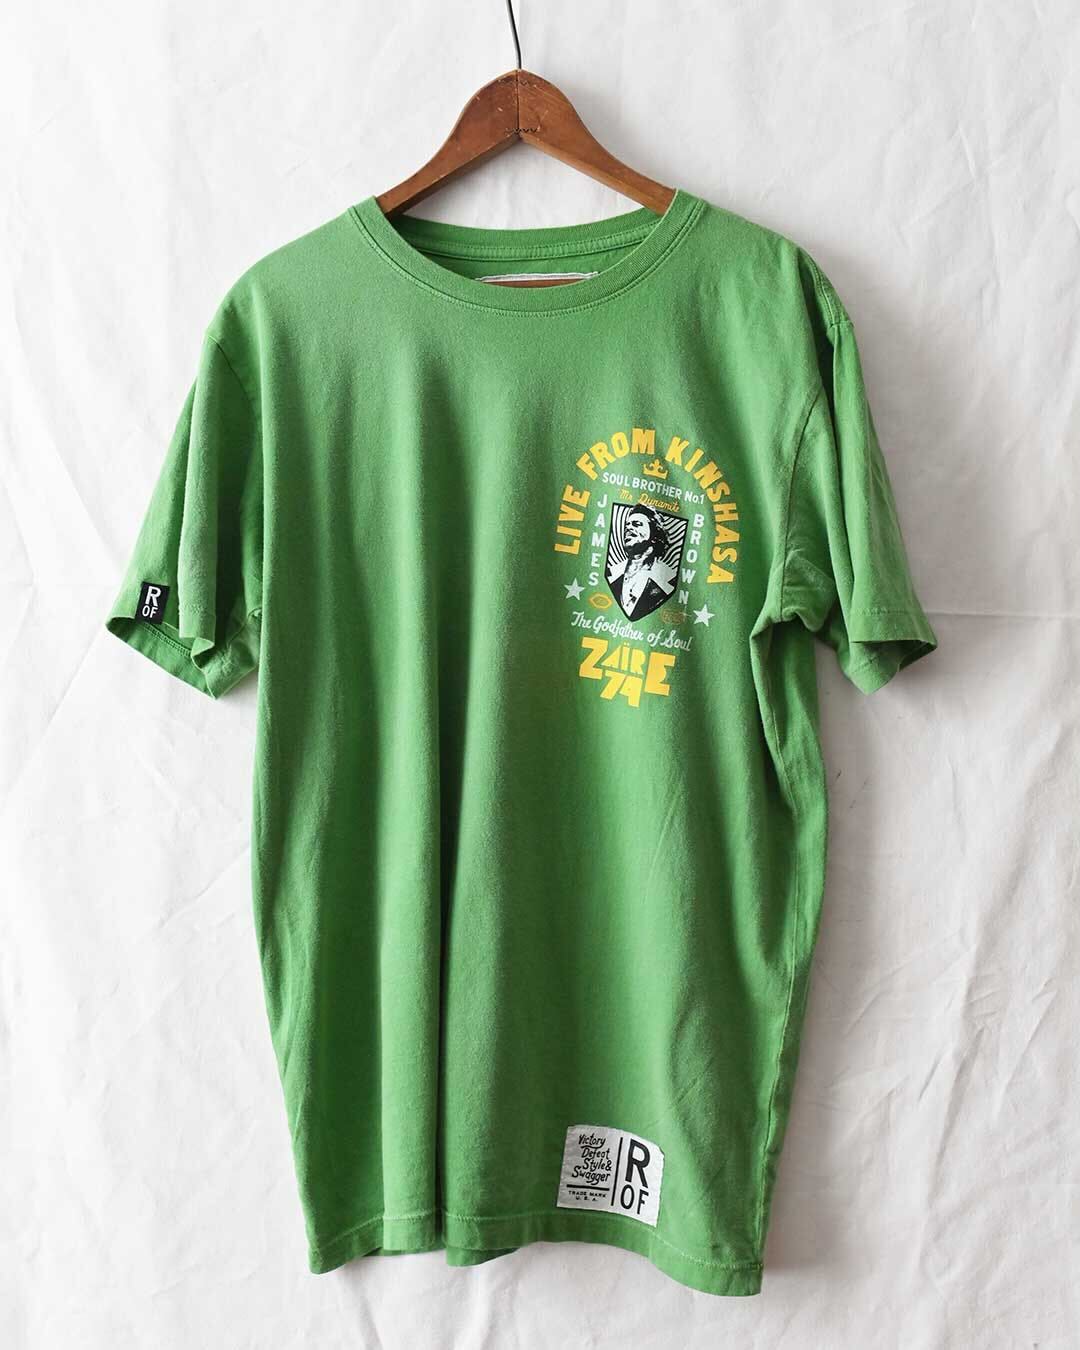 James Brown Zaire Green Tee - Roots of Fight